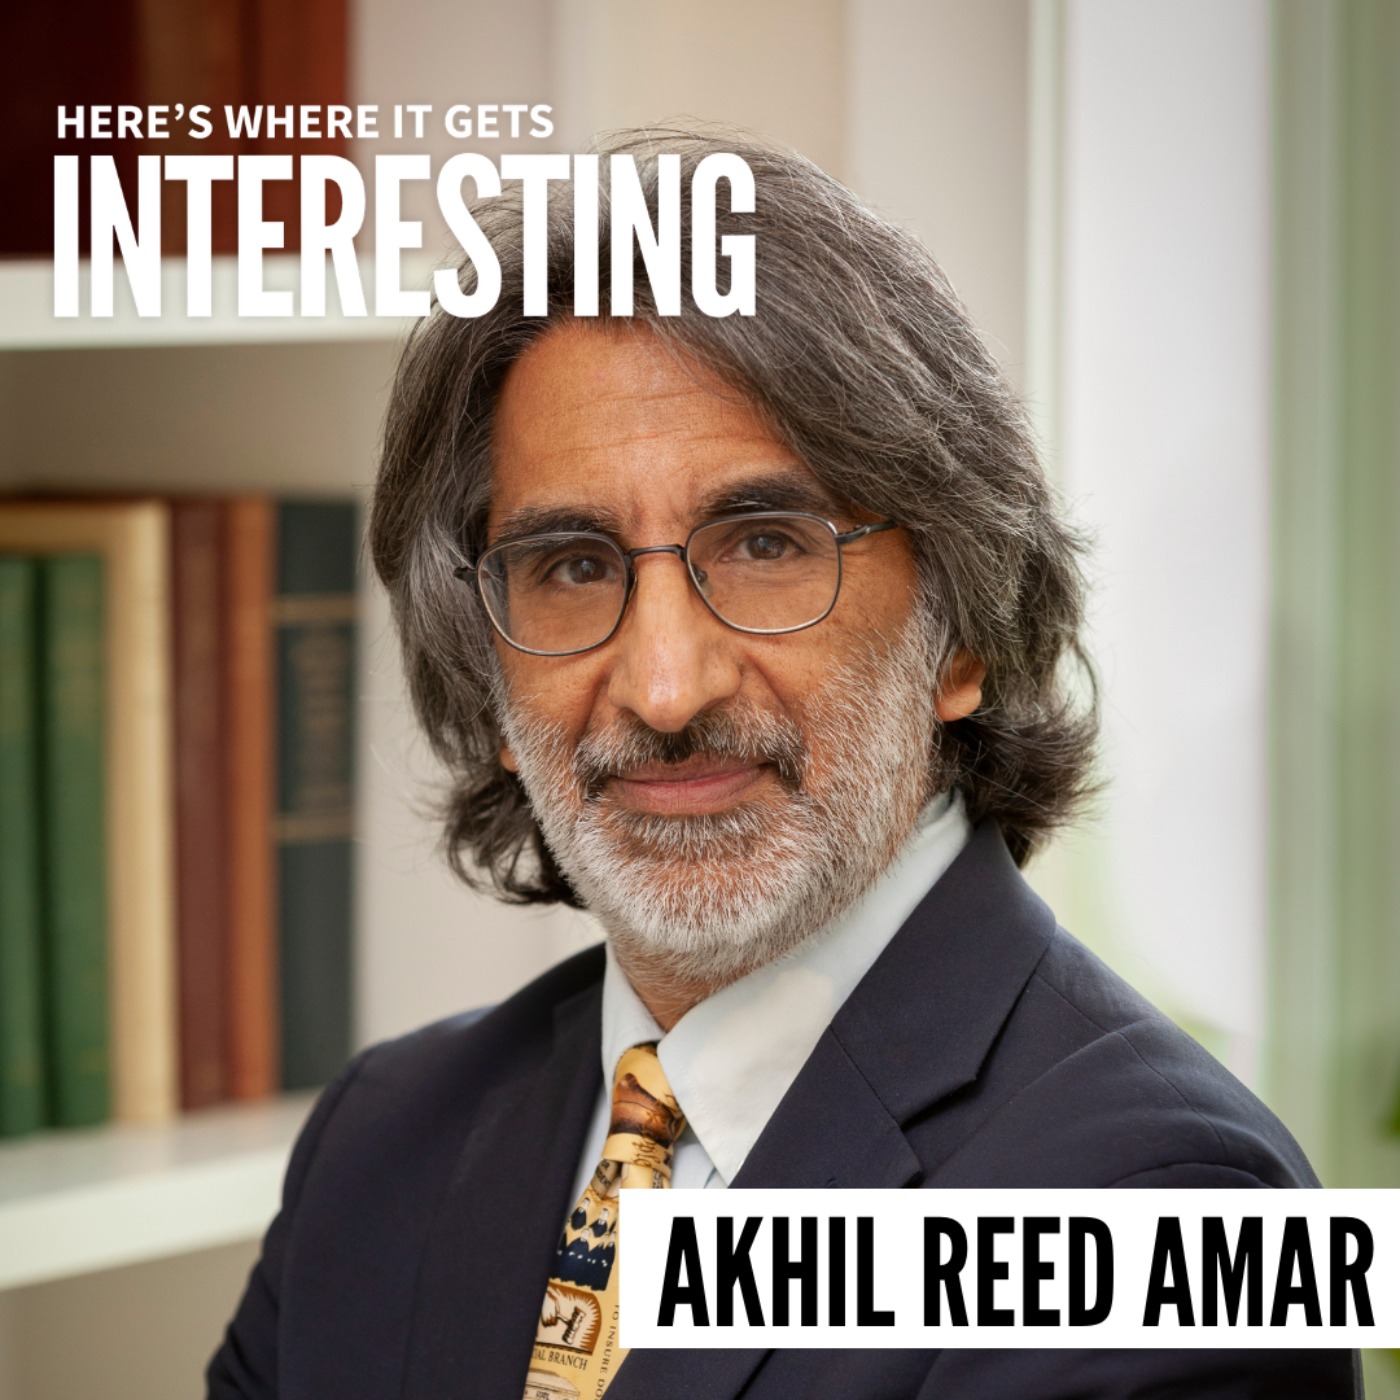 The Enduring Value of the U.S. Constitution with Akhil Reed Amar, Part 1